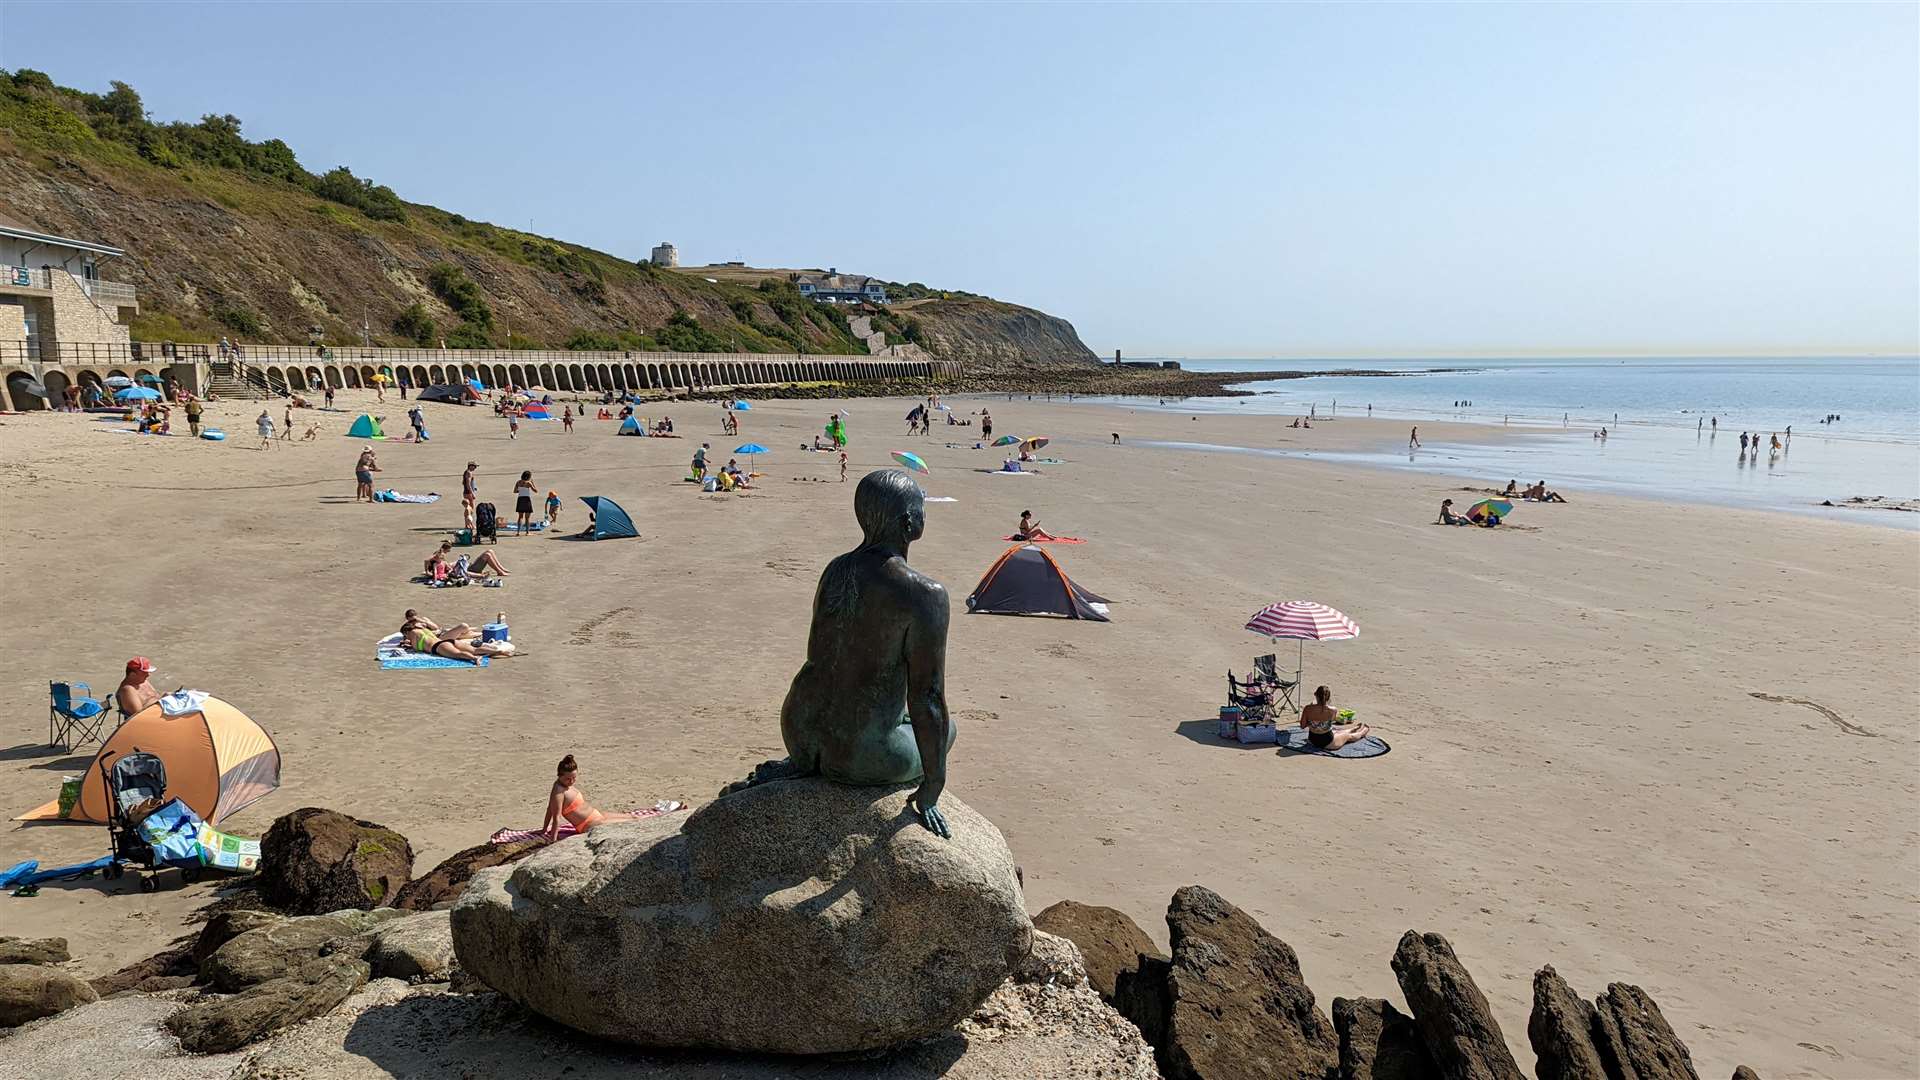 Sunny Sands beach was named one of the best in Europe